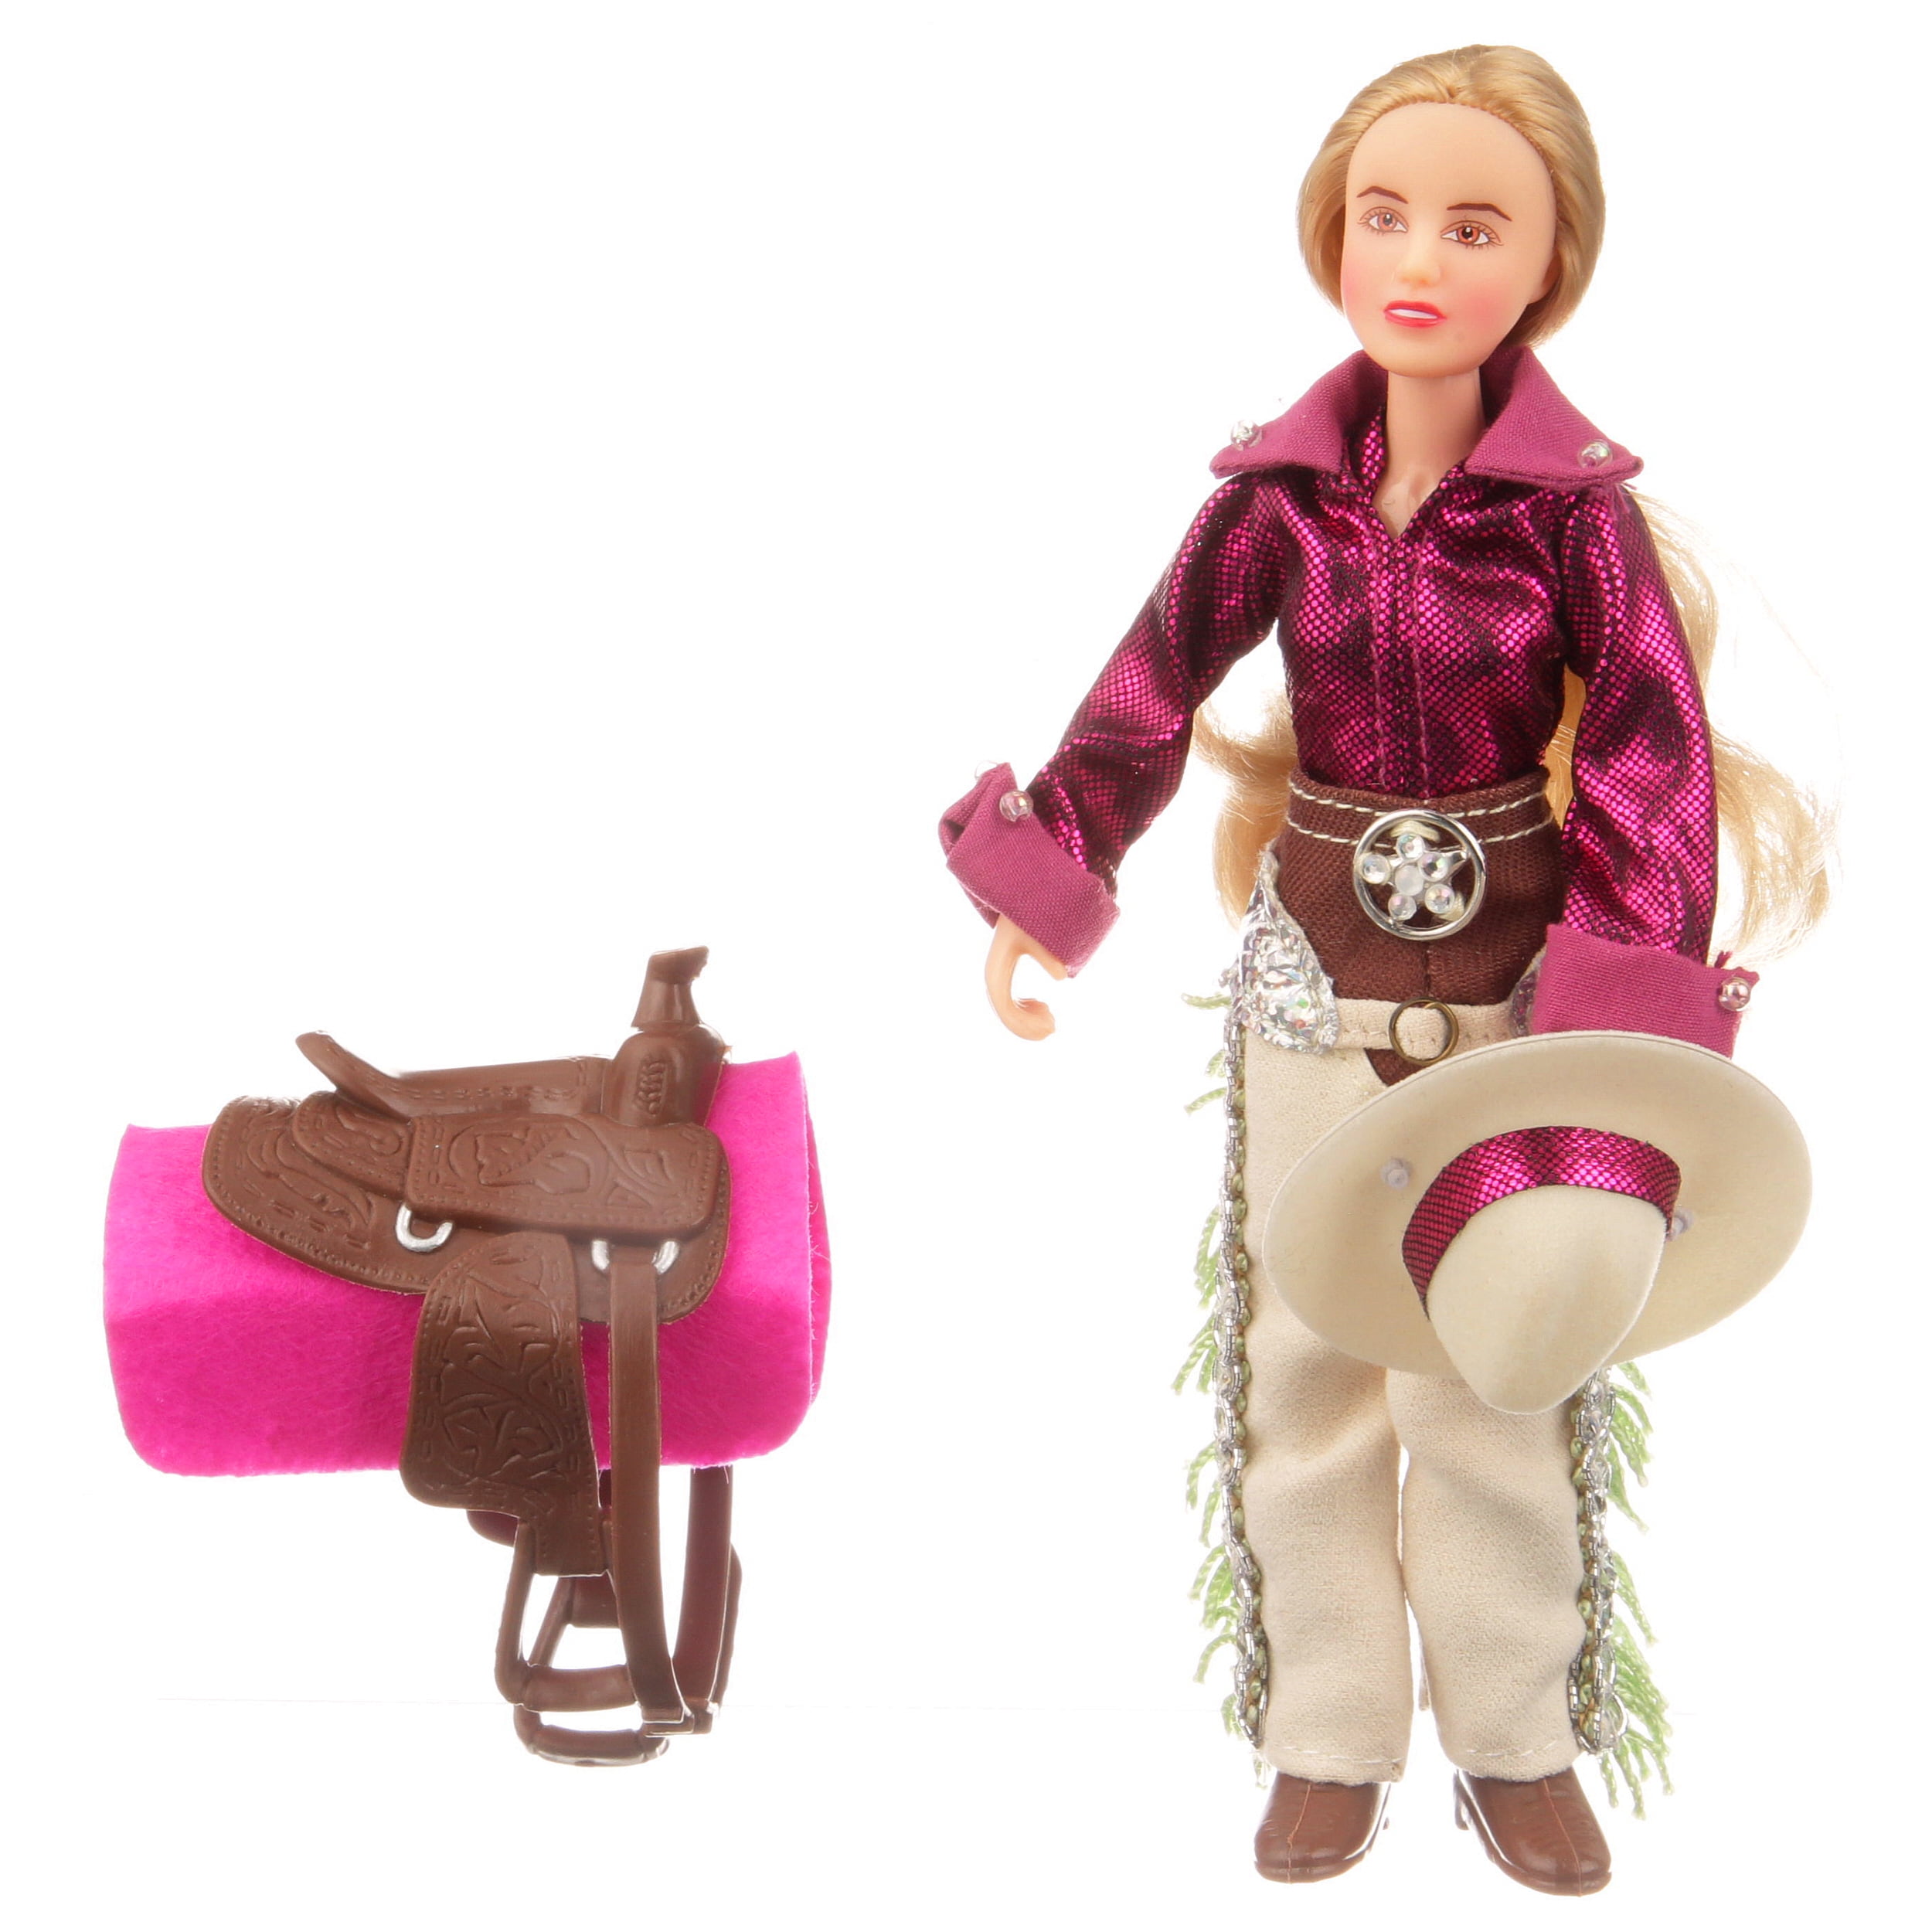 Bestseller Kaitlyn Cowgirl Rider for Classics Toy Horses w/ Western Saddle 